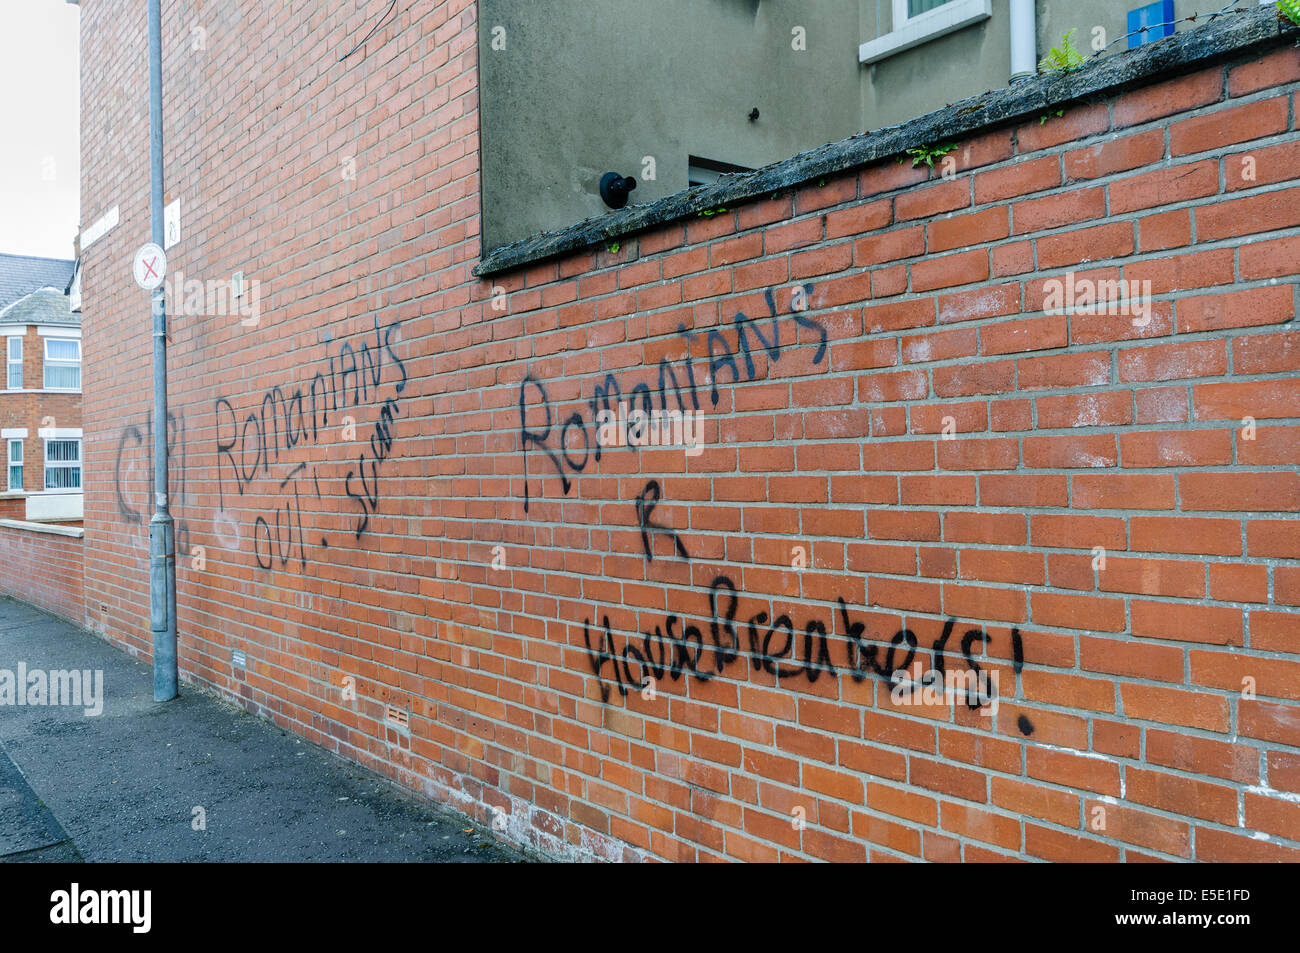 Belfast, Northern Ireland. 29th July, 2014. Graffiti saying 'C18! Romanians Out! Scum.  Romanians R [sic] Housebreakers' spraypainted  on a wall in Belfast. Credit:  Stephen Barnes/Alamy Live News Stock Photo